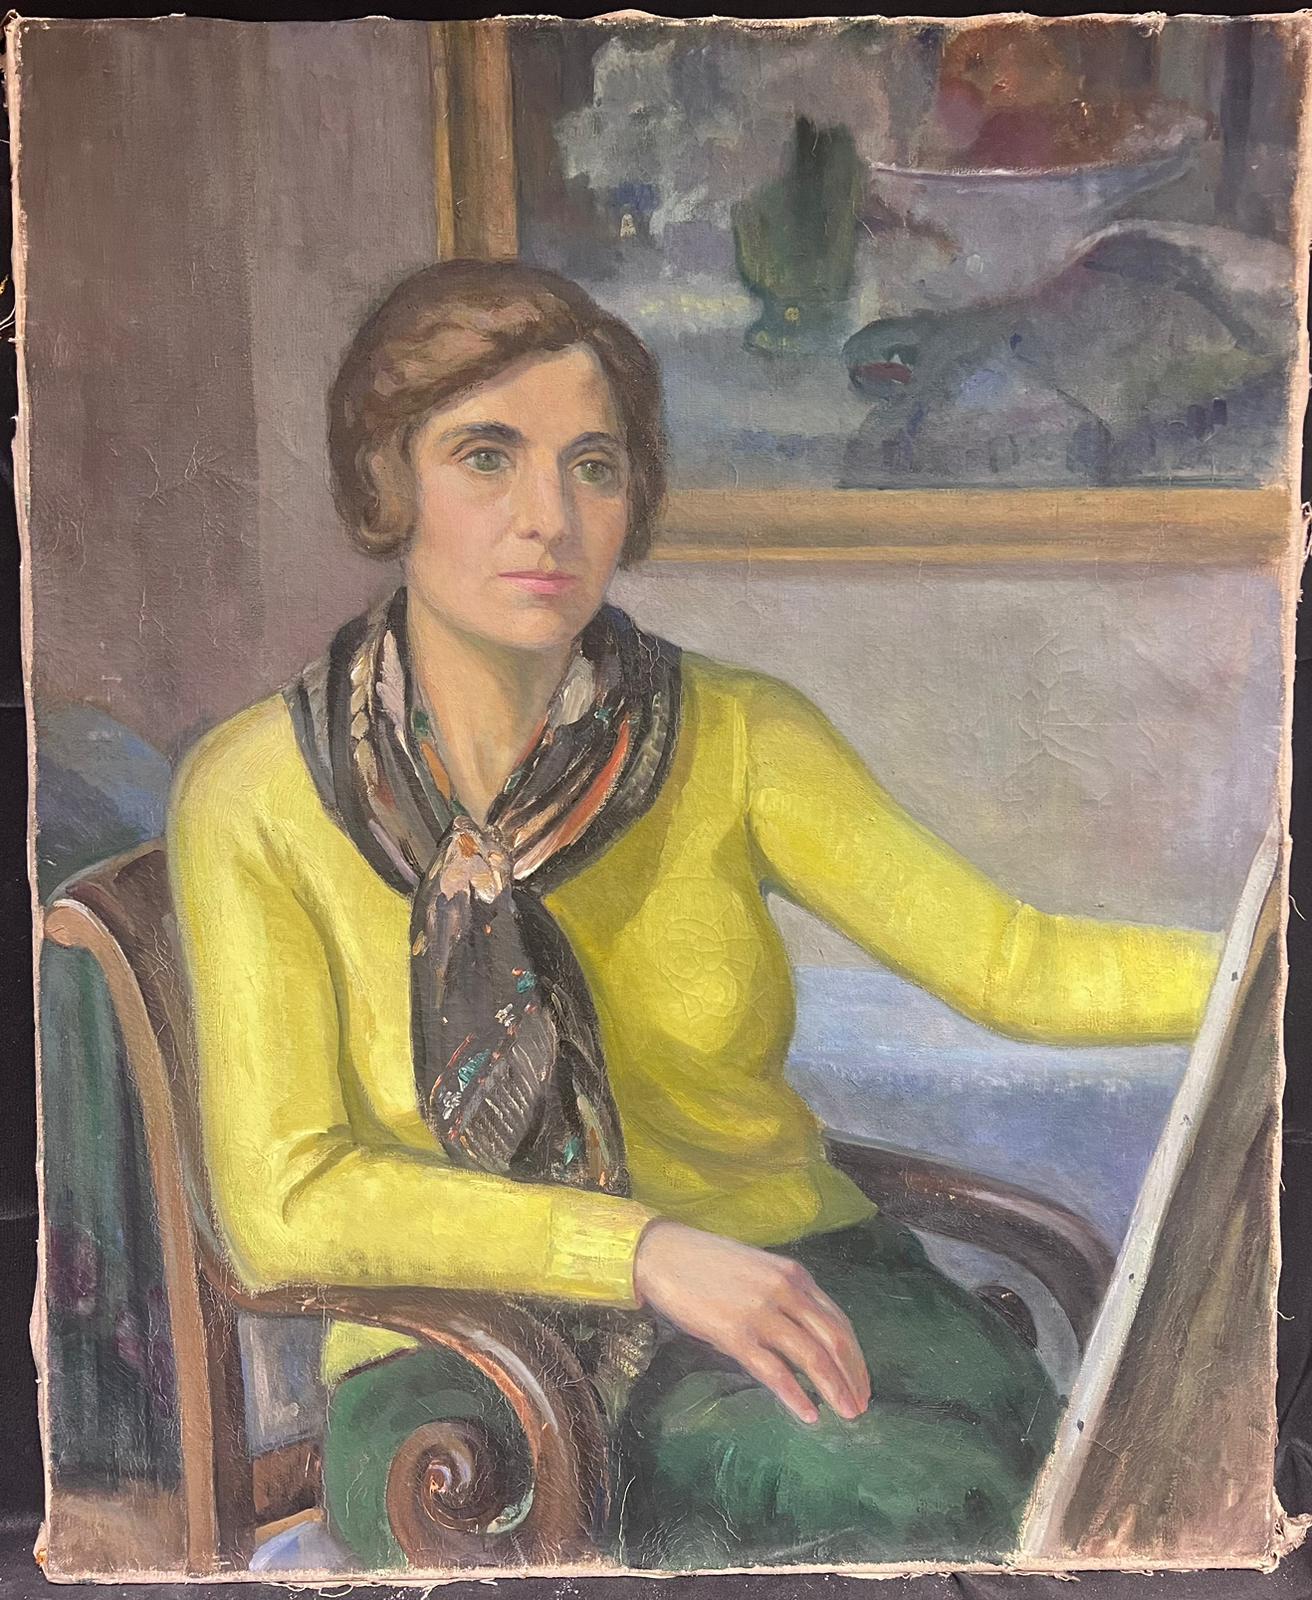 Self Portrait of the Artist at her Easel
by Louise Alix (French, 1888-1980) *see notes below
provenance stamp to the back 
oil painting on canvas , unframed
measures: 35 high by 28.5 inches wide
condition: overall very good and sound, a few scuffs